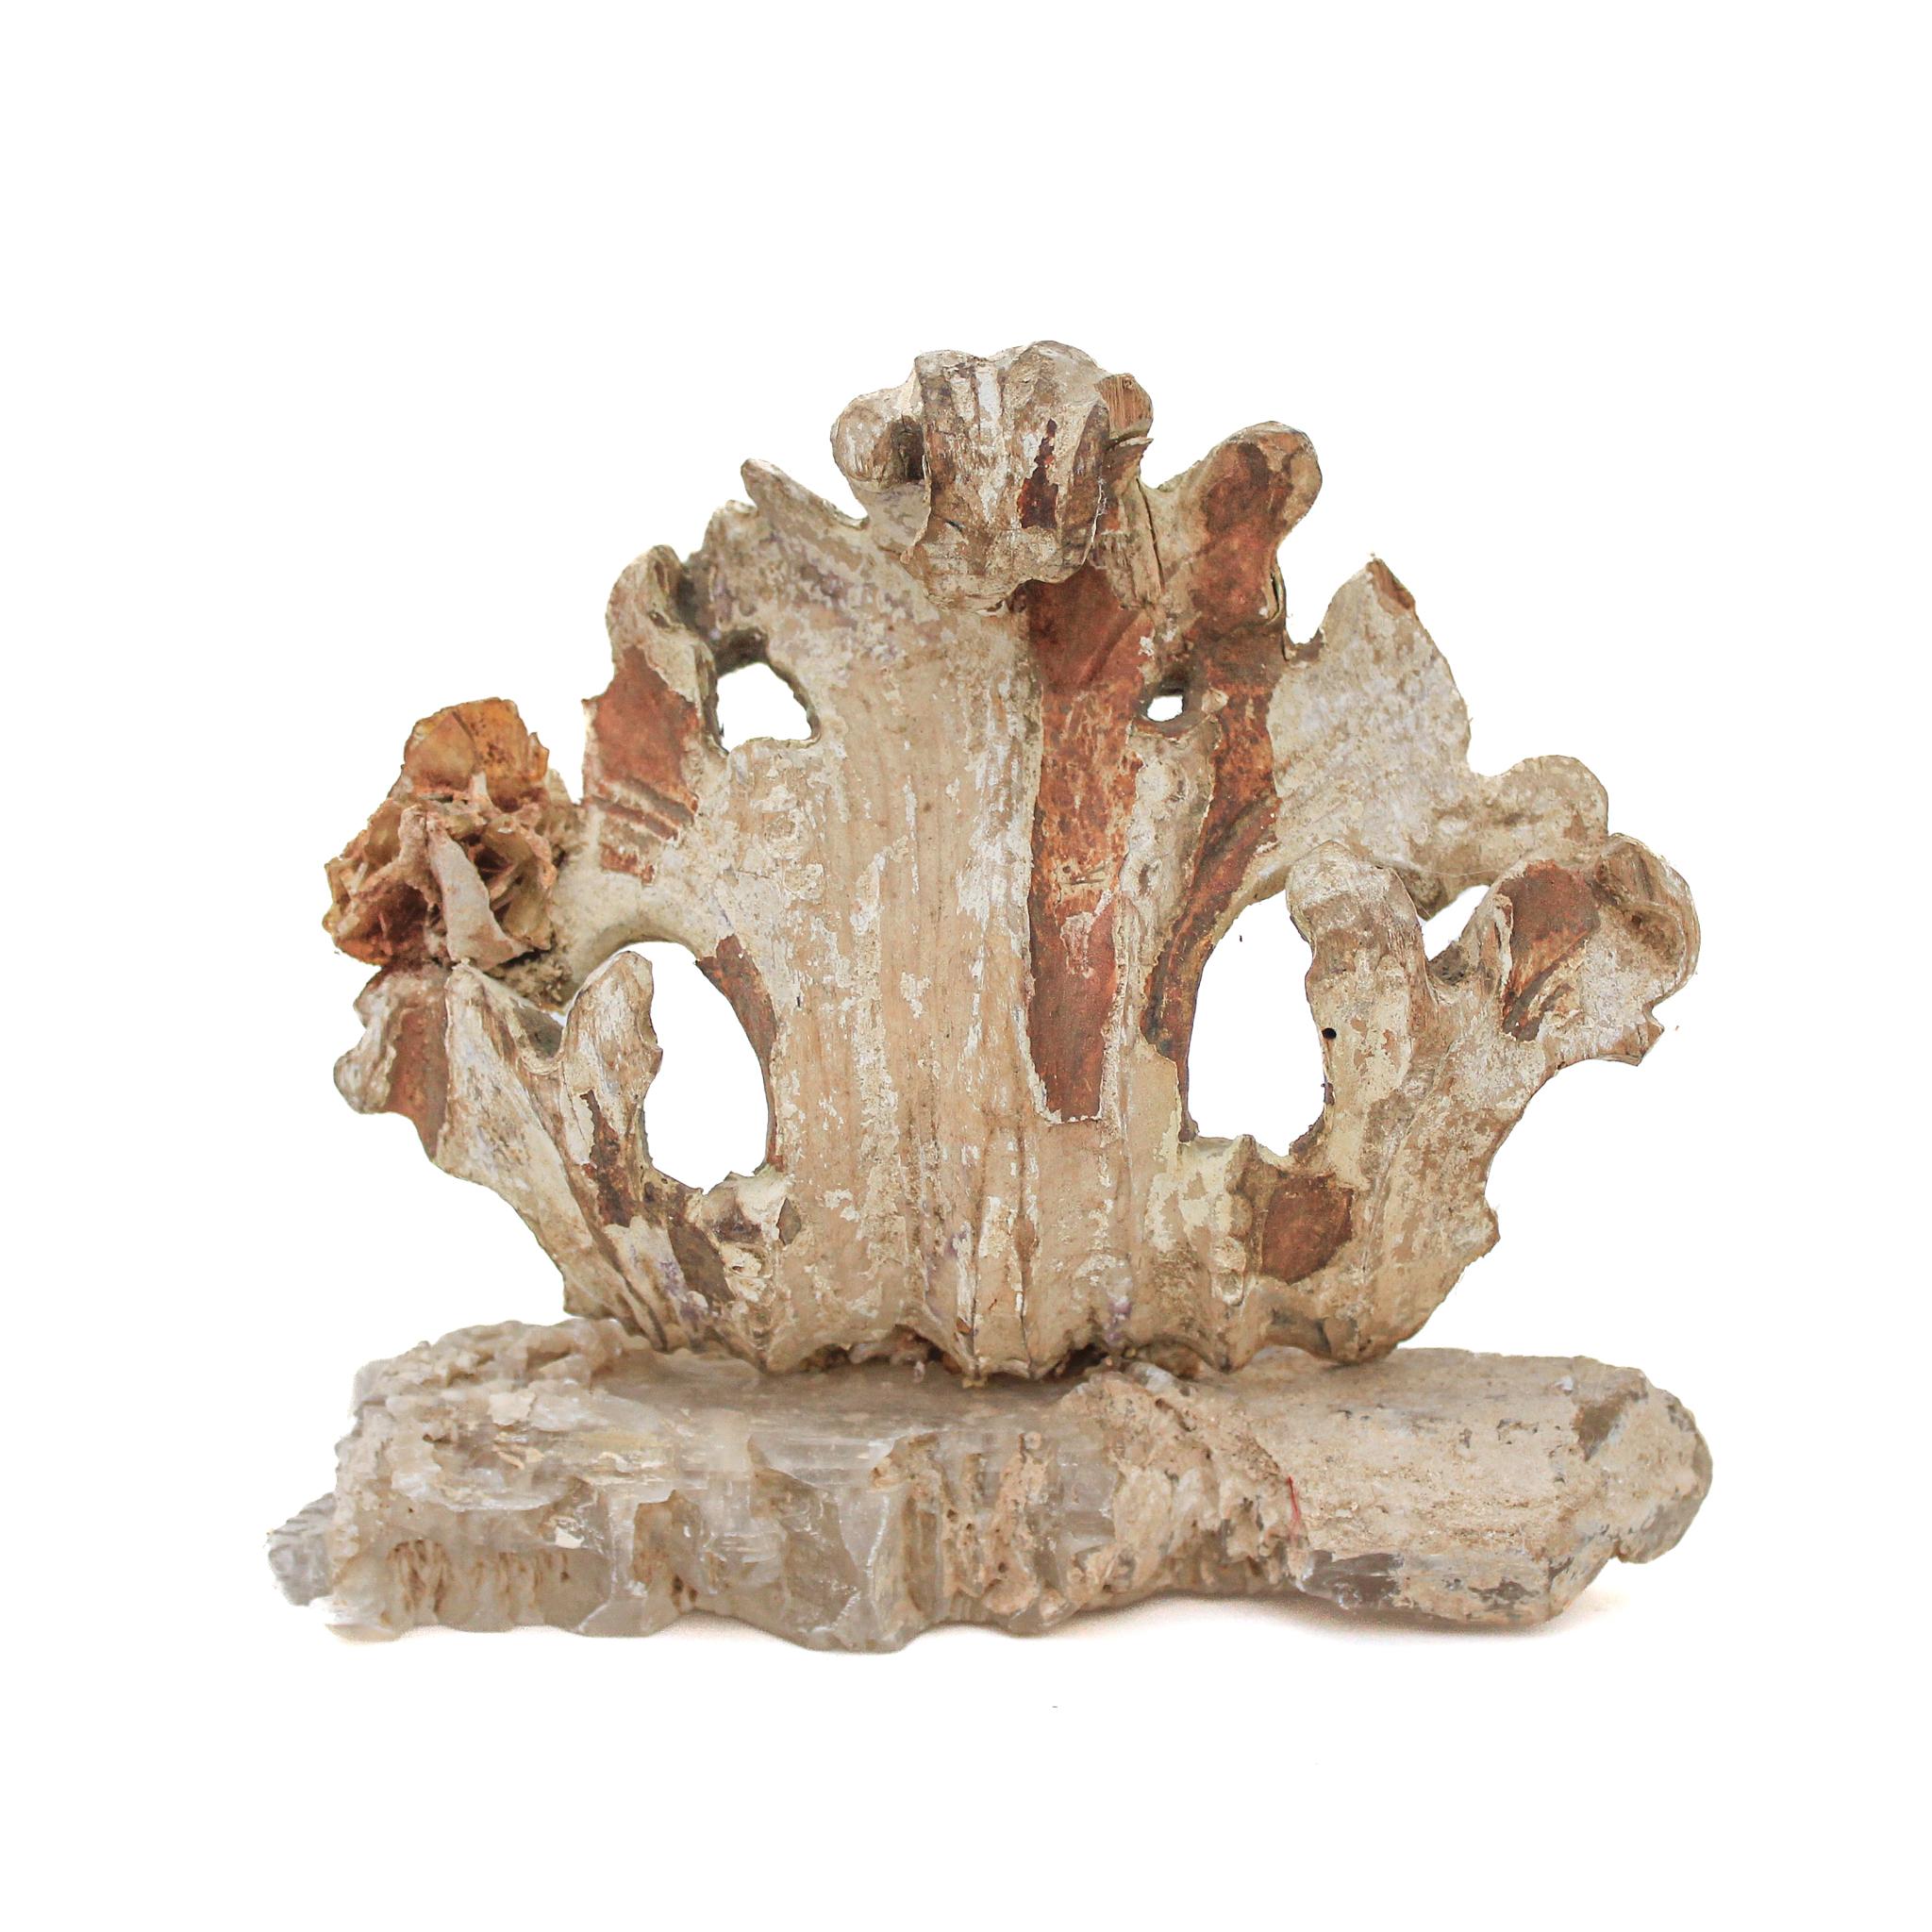 17th century Italian fragment with wulfenite on a fishtail selenite base

This fragment is from a church in Florence. It was found and saved from the historic flooding of the Arno River in 1966.

The piece has been naturally distressed from the